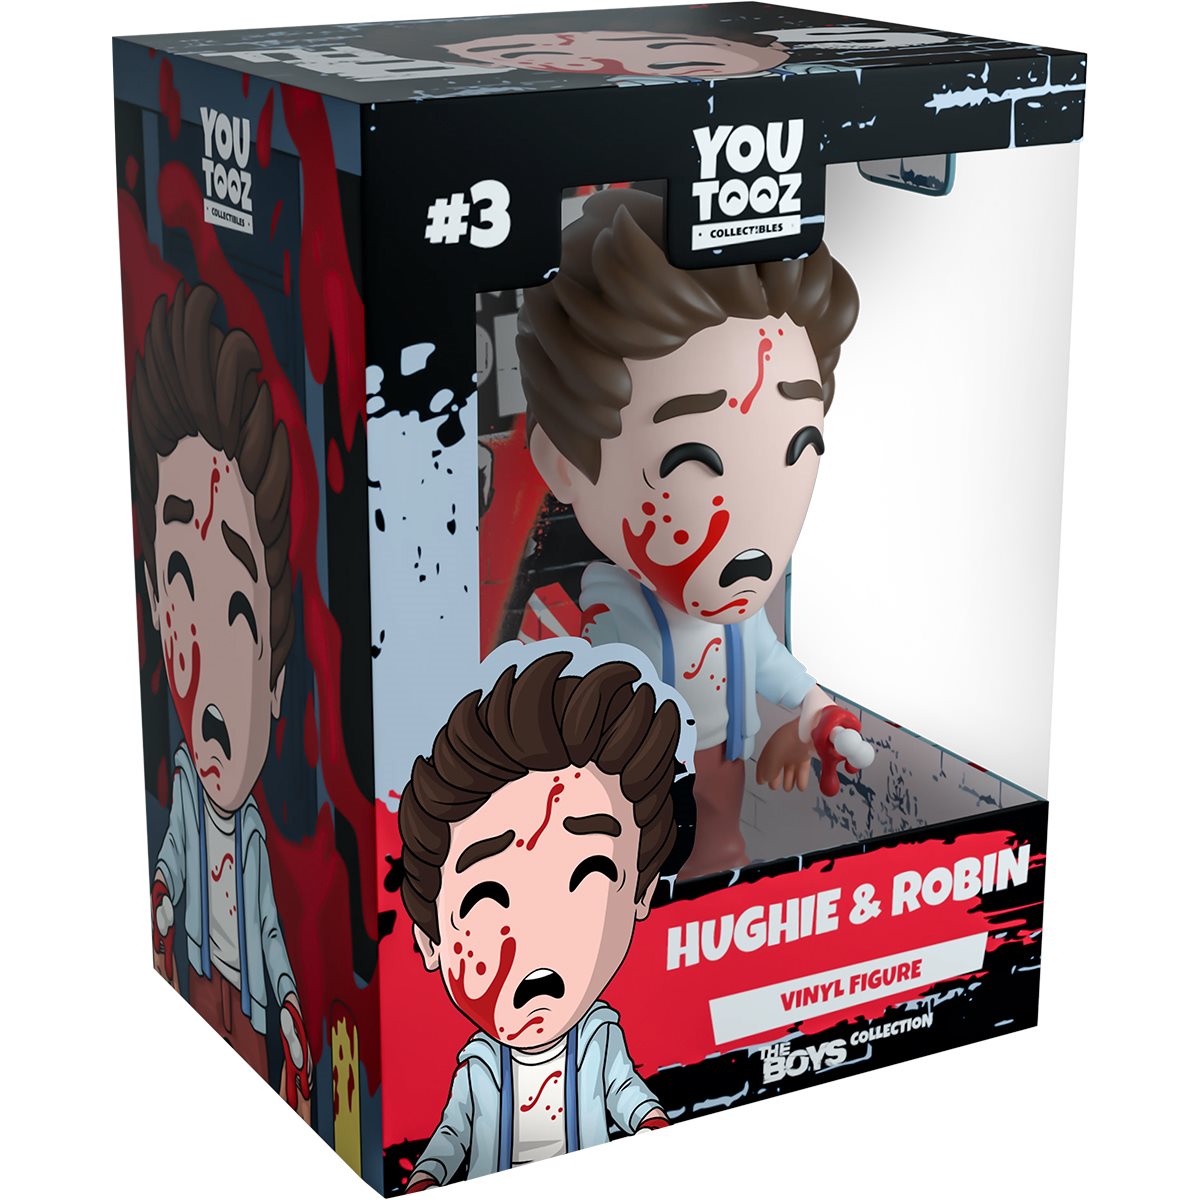 The Boys Collection Hughie and Robin Vinyl Figure #3 by Youtooz